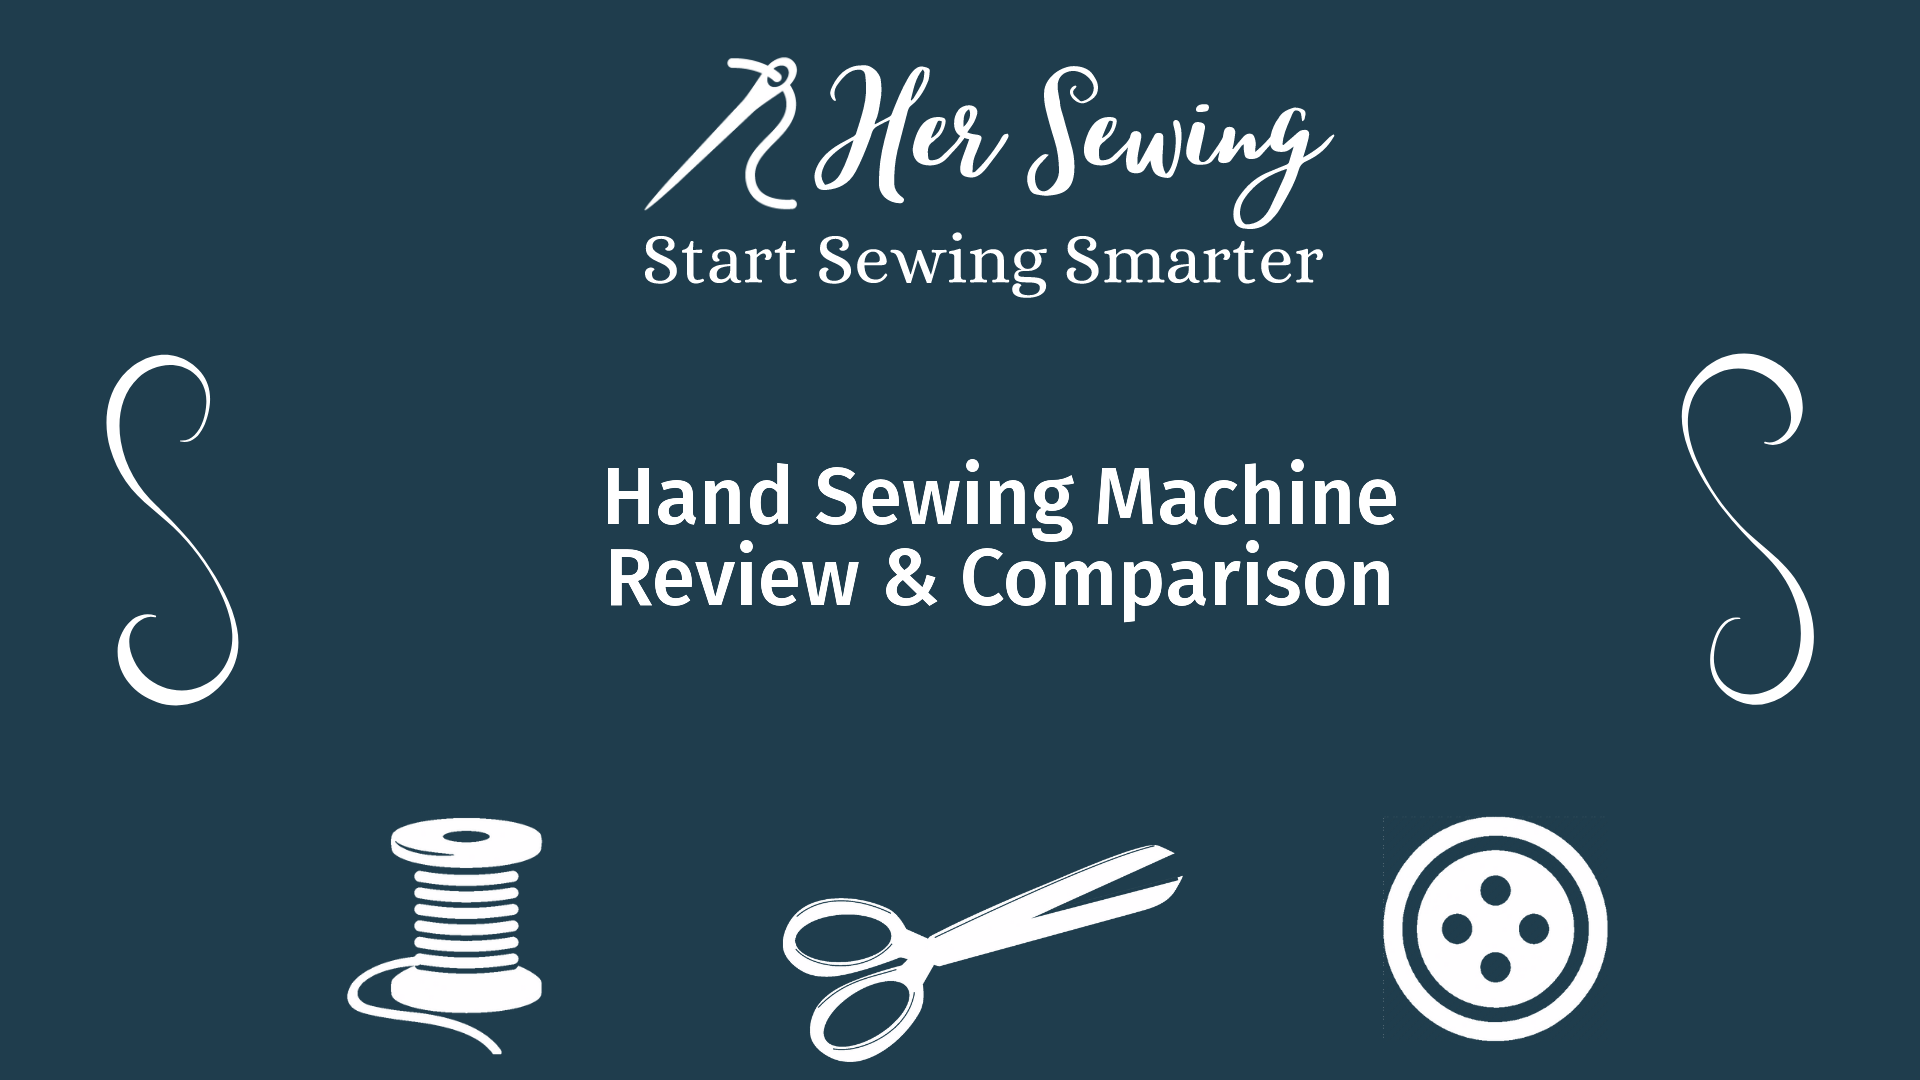 Hand Sewing Machine Review & Comparison